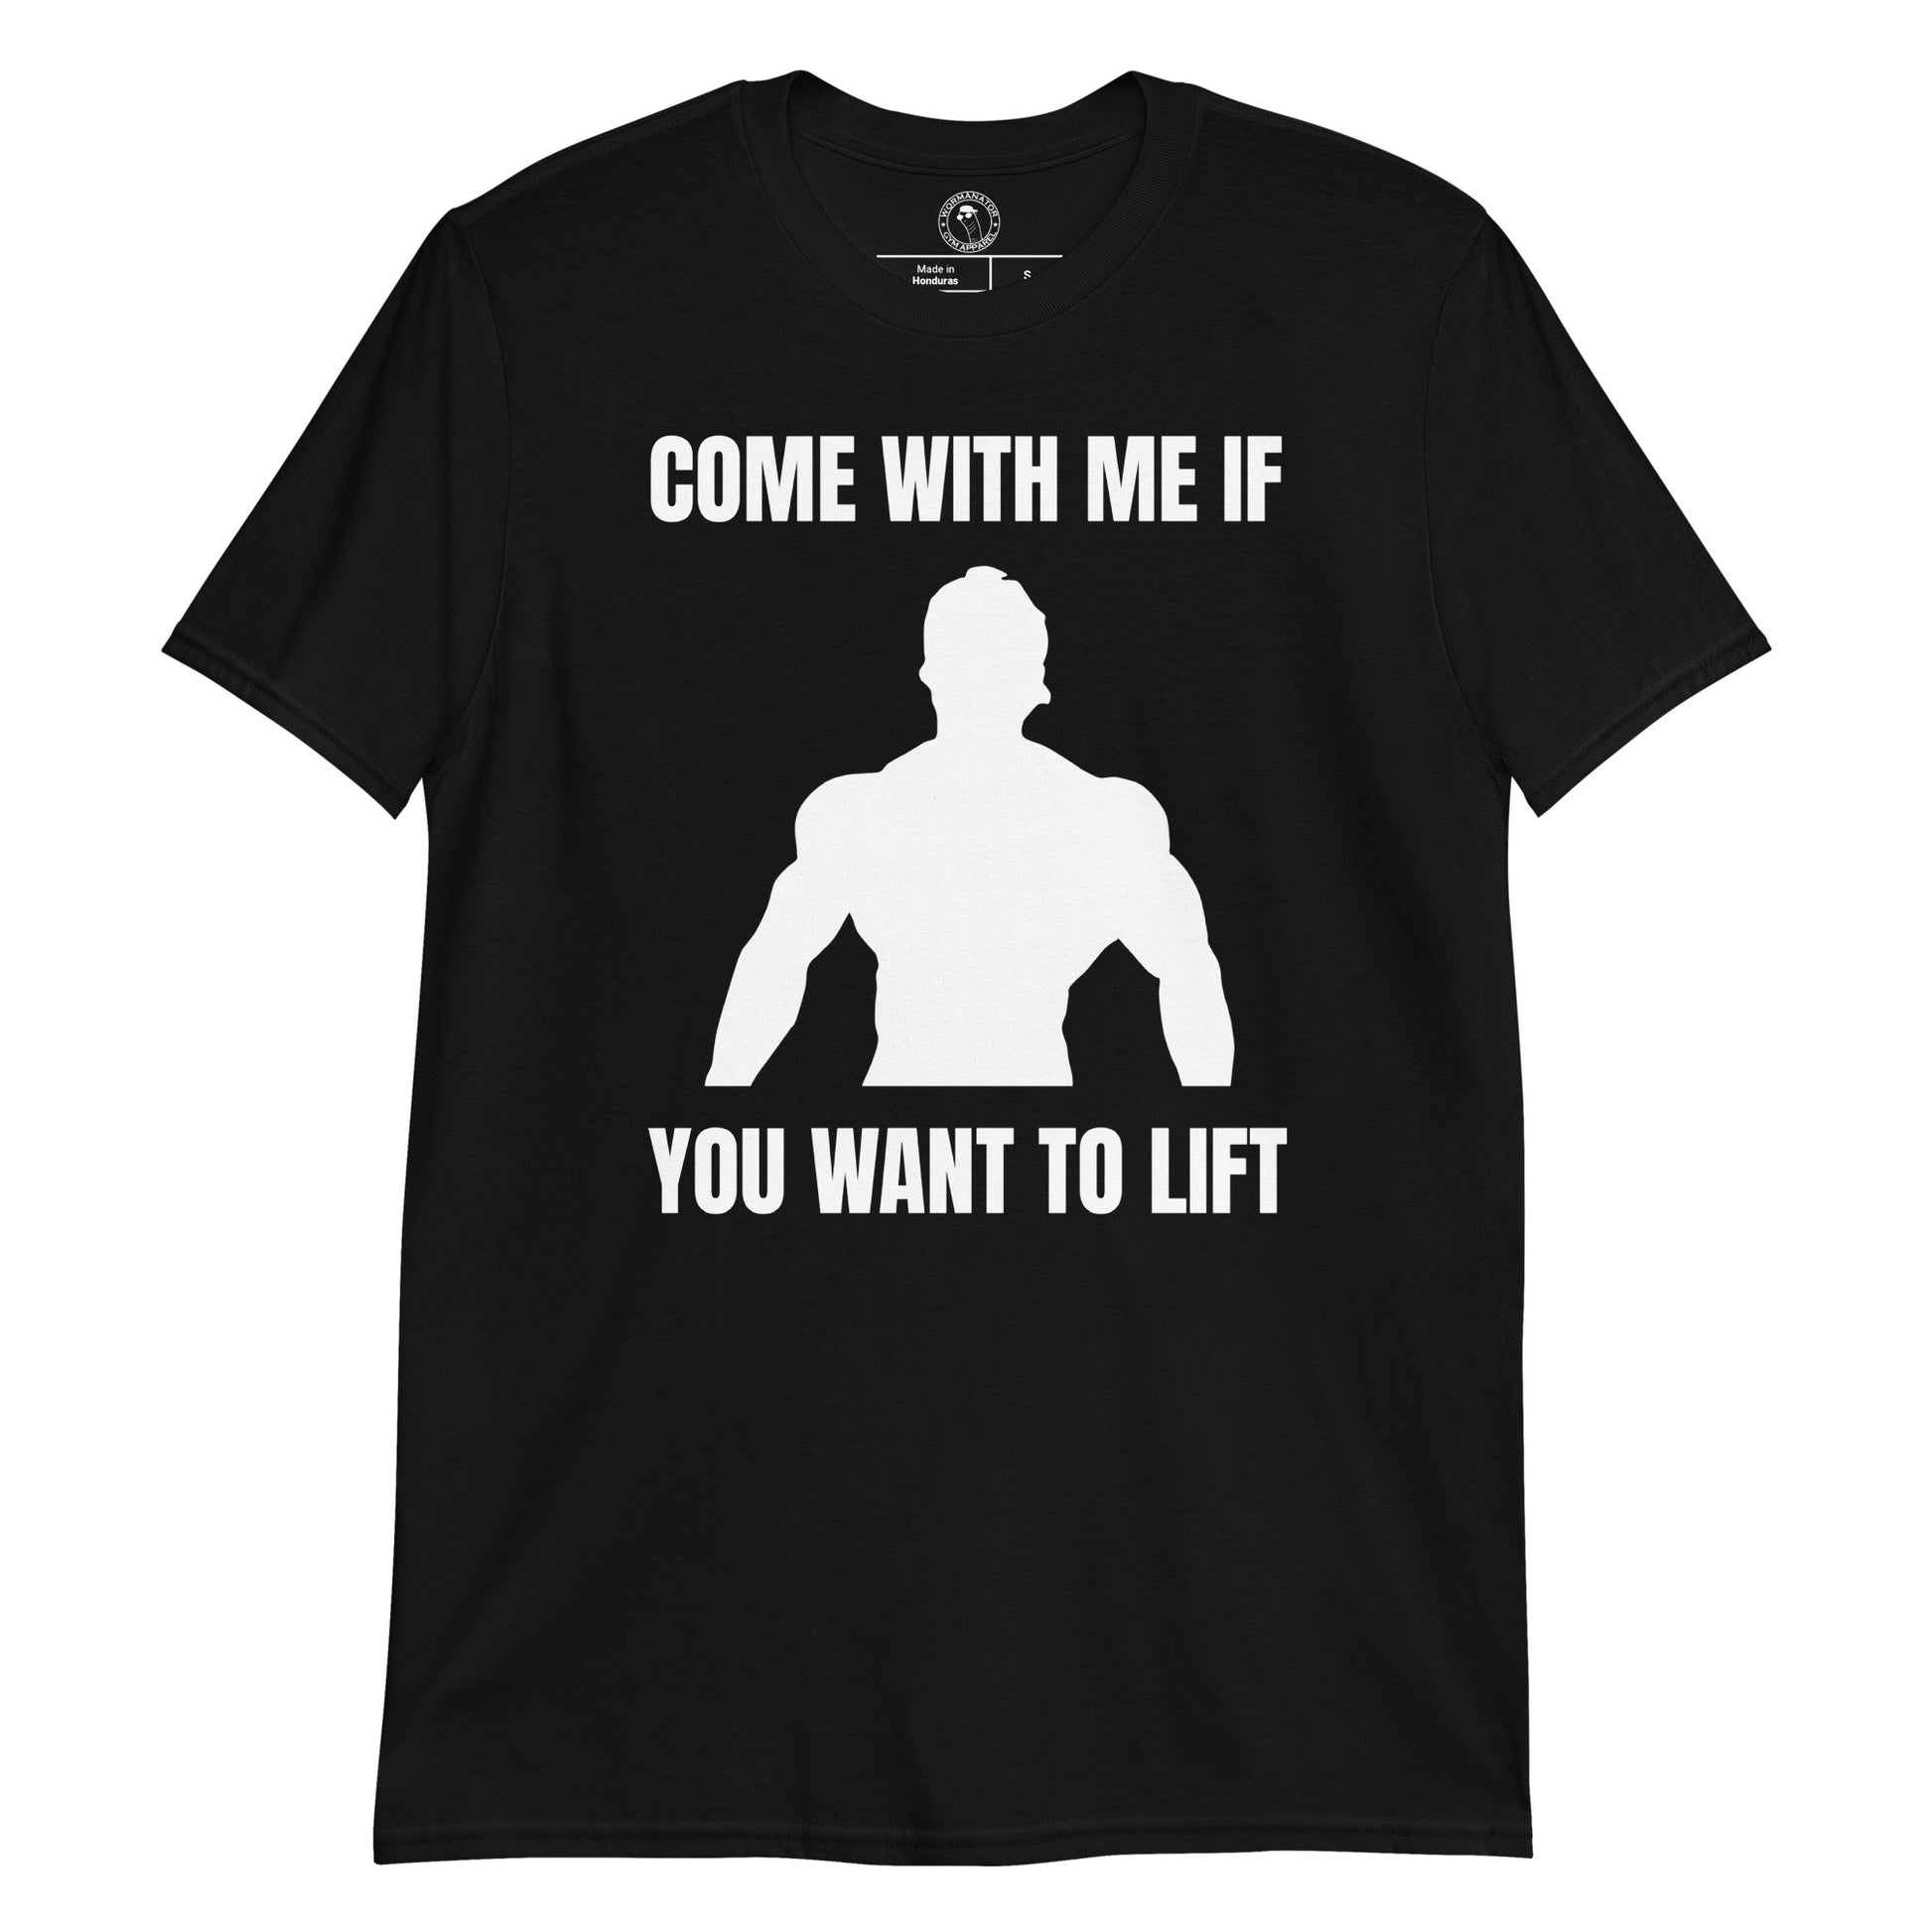 Come with Me if You Want to Lift Shirt in Black